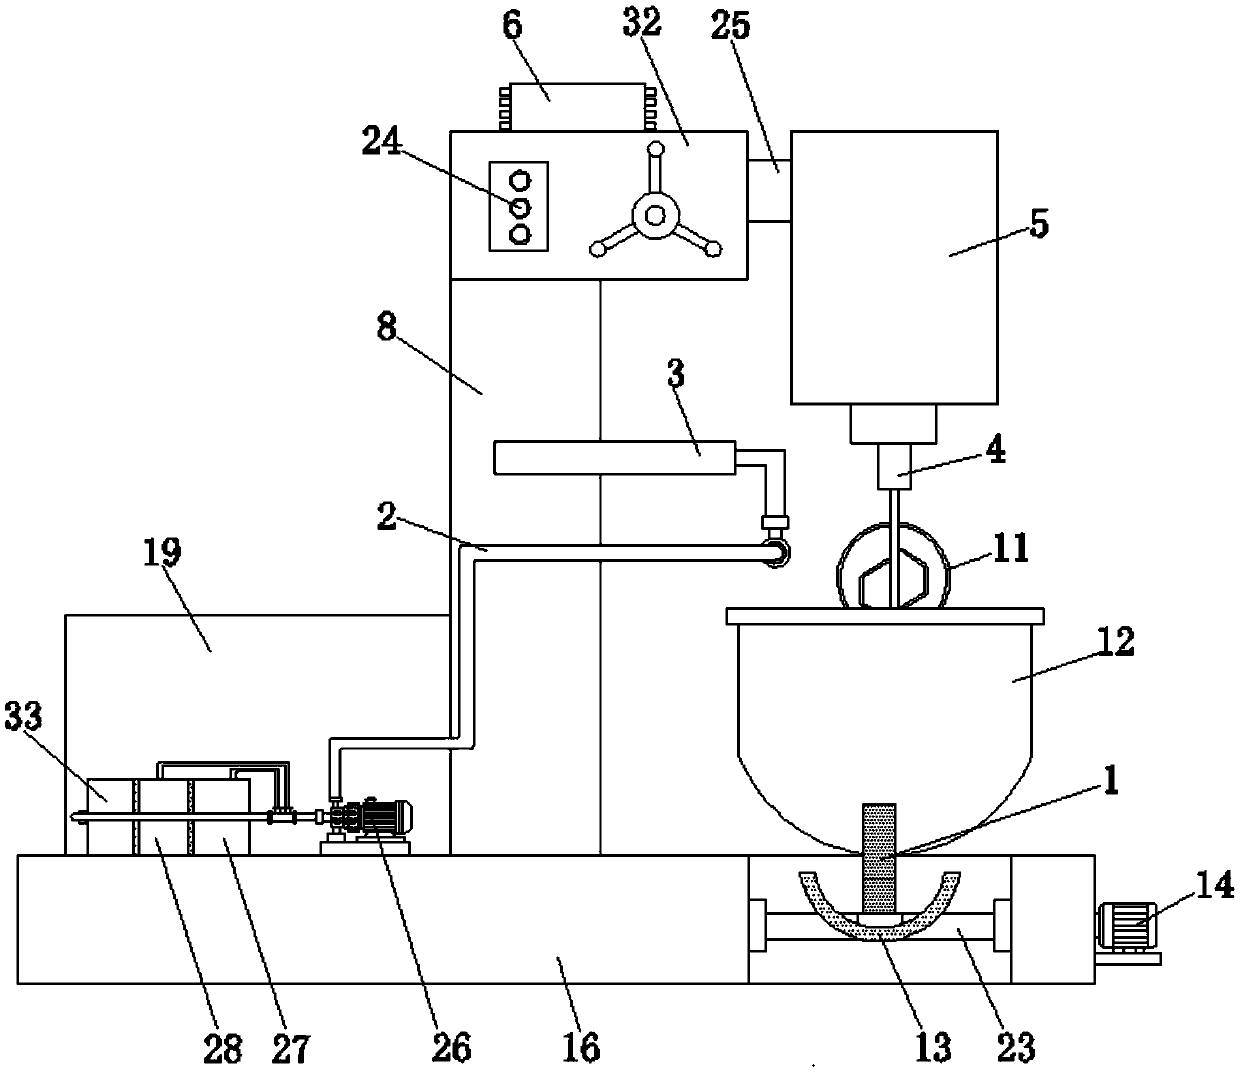 Flour mixing machine capable of cleaning flour on inner wall of flour mixing pot